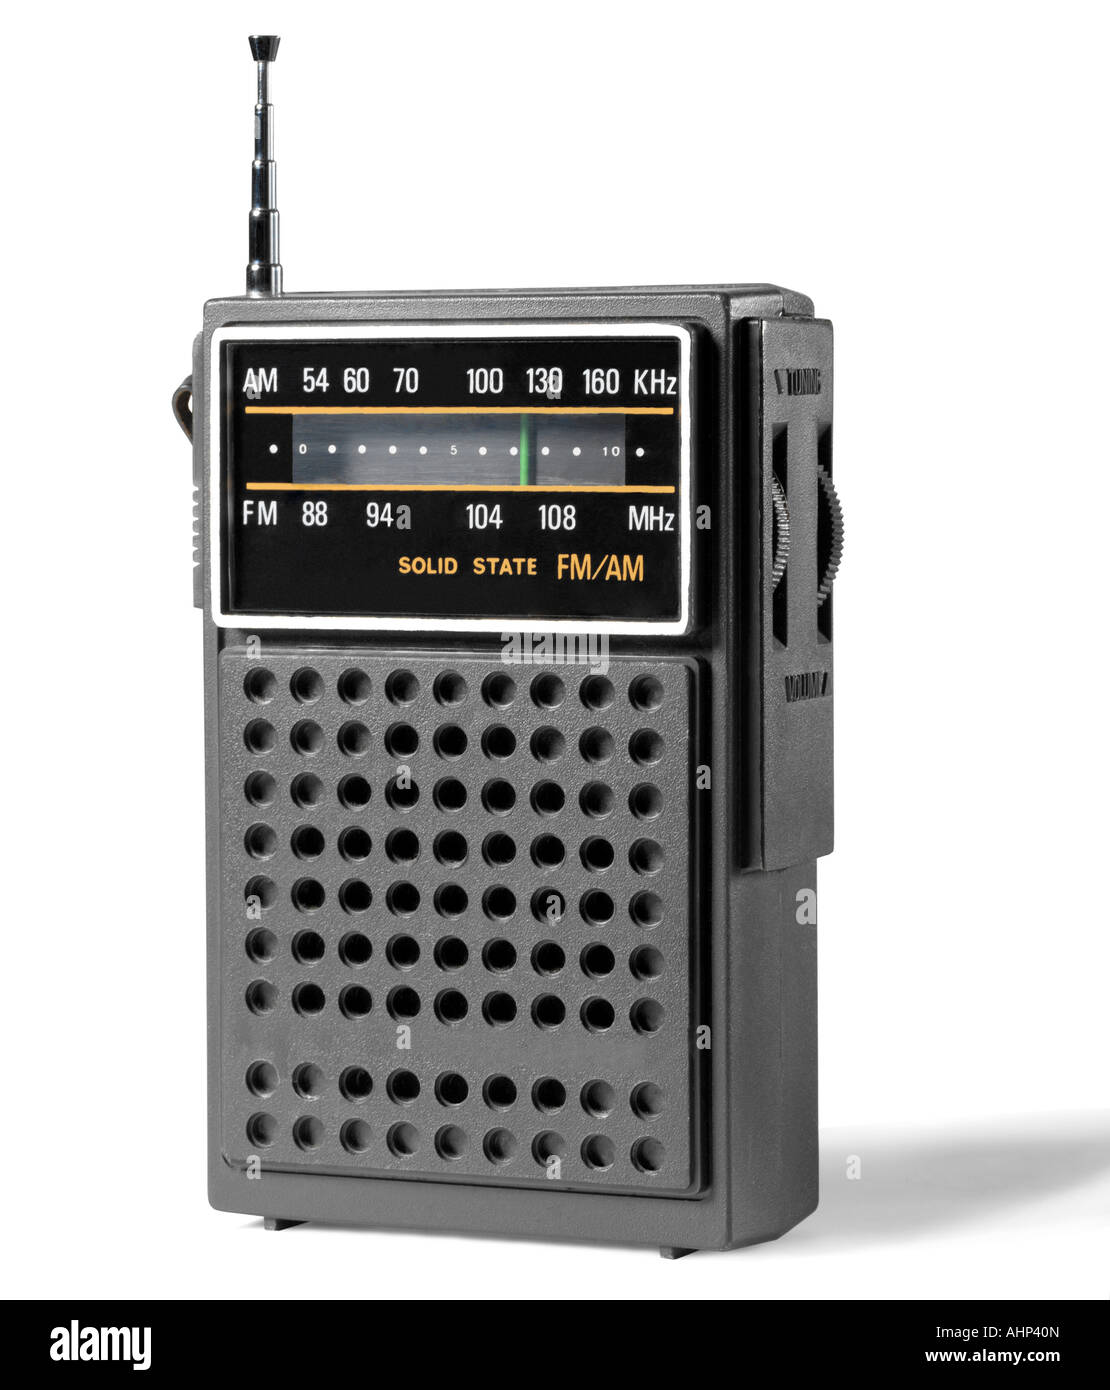 TZS First Austria AM/FM Radio Receiver - Finished Projects